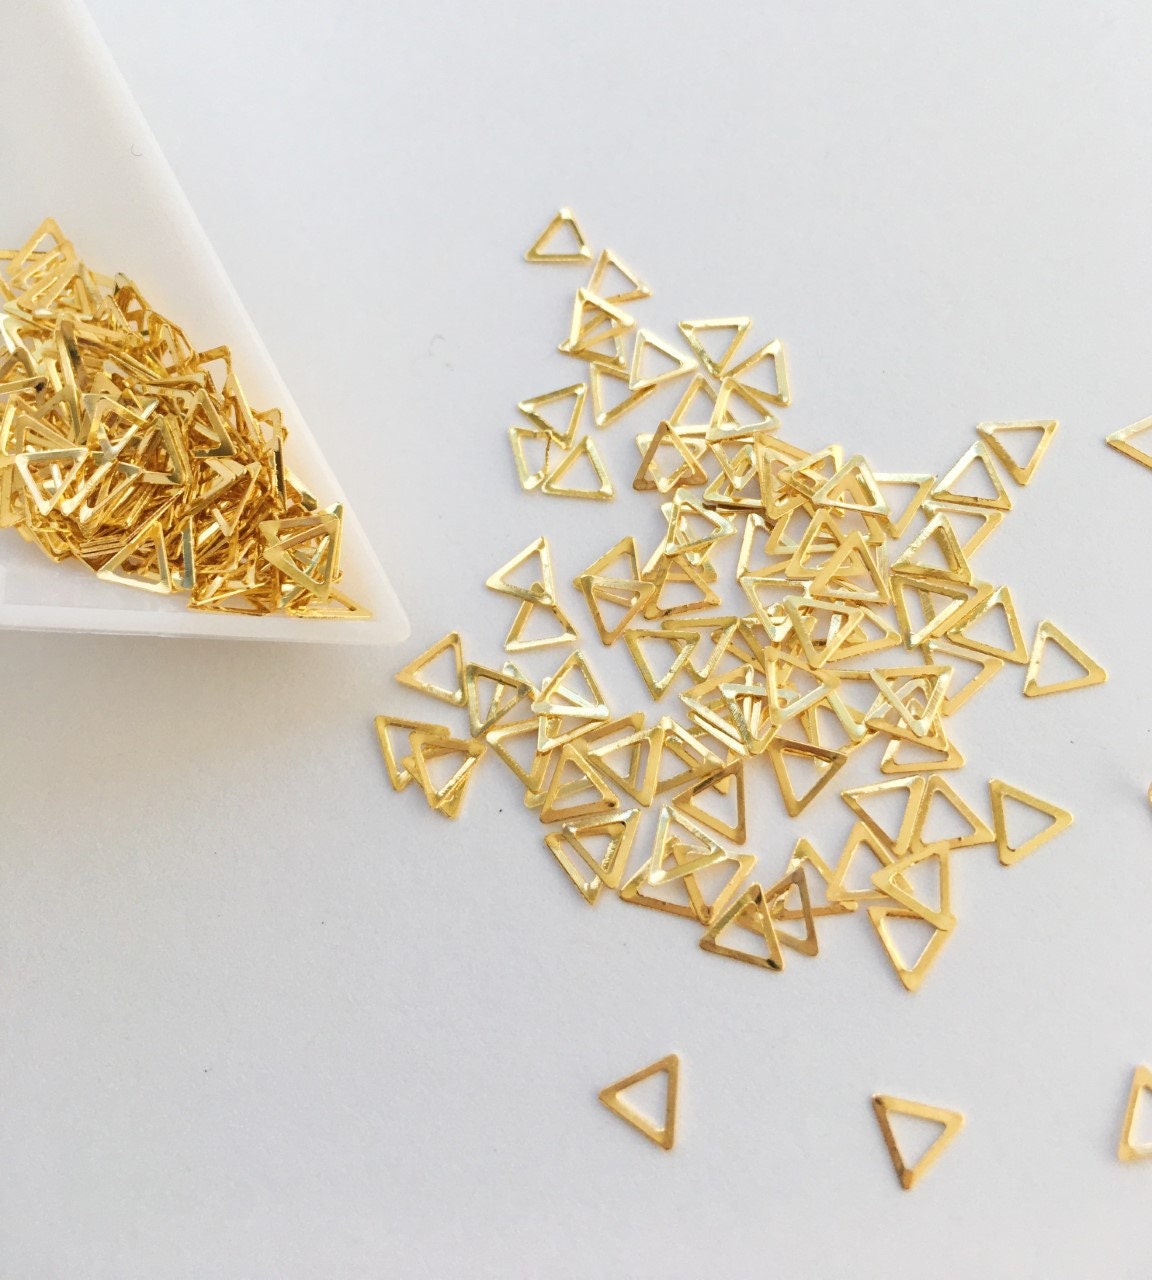 Nail Art Charm Resin Supplies Cute Kawaii Nail Triangles Tiny Gold Triangles Cabochons Nail Decals 10/20/50 Pieces #2012 Resin add-on